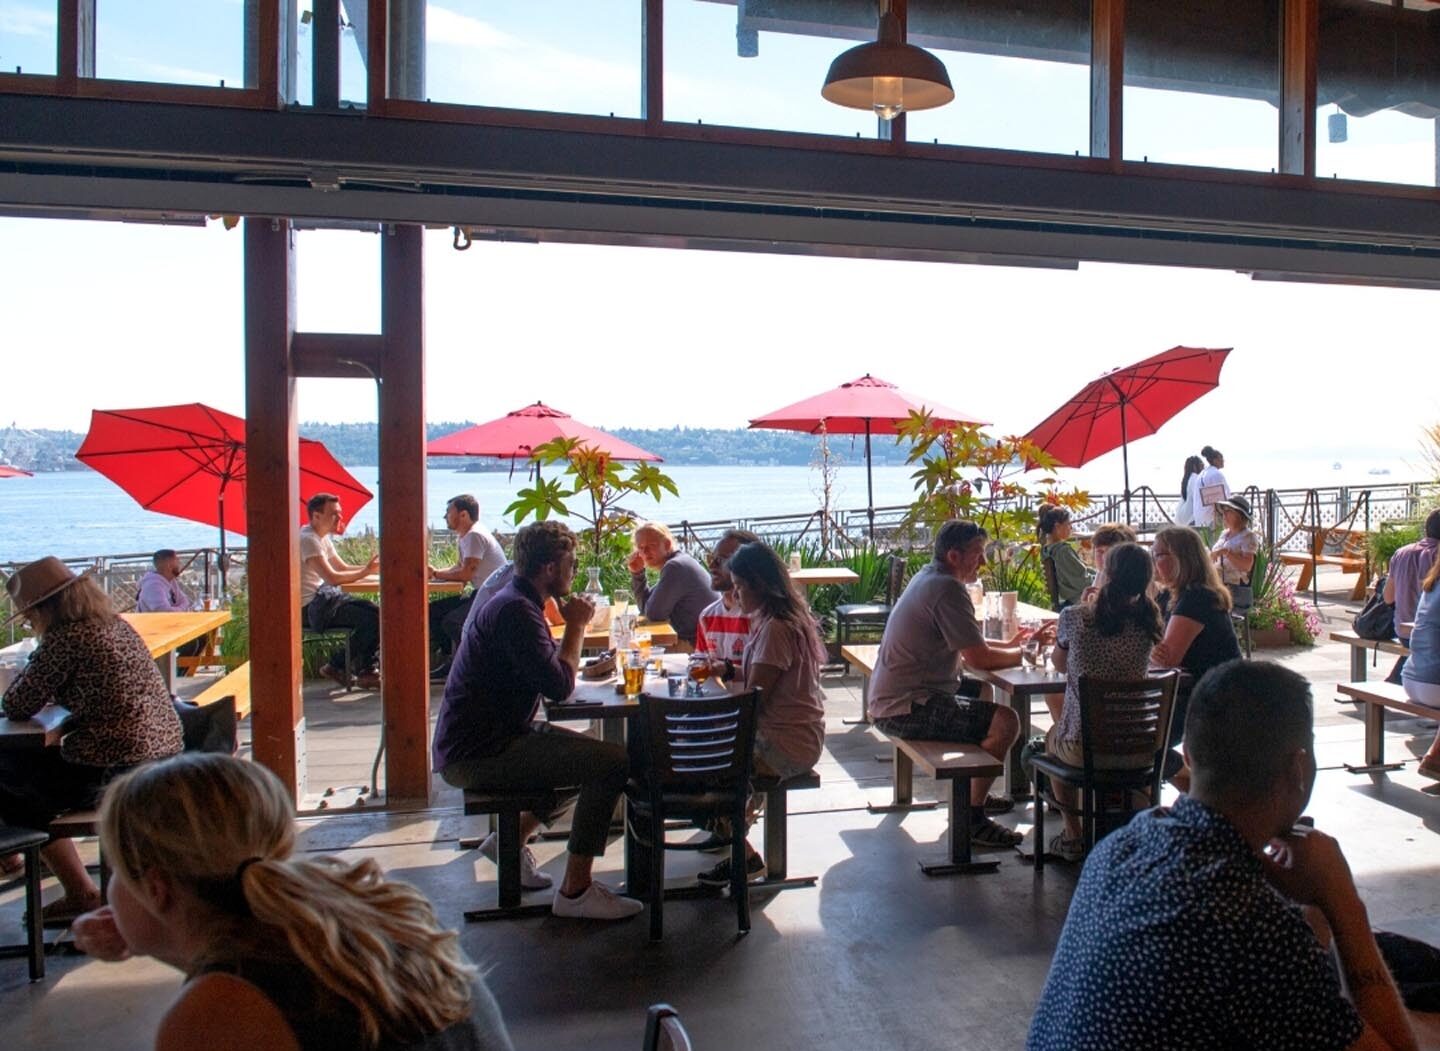 patrons enjoying a sunny summer day at old stove brewery at pike place market 